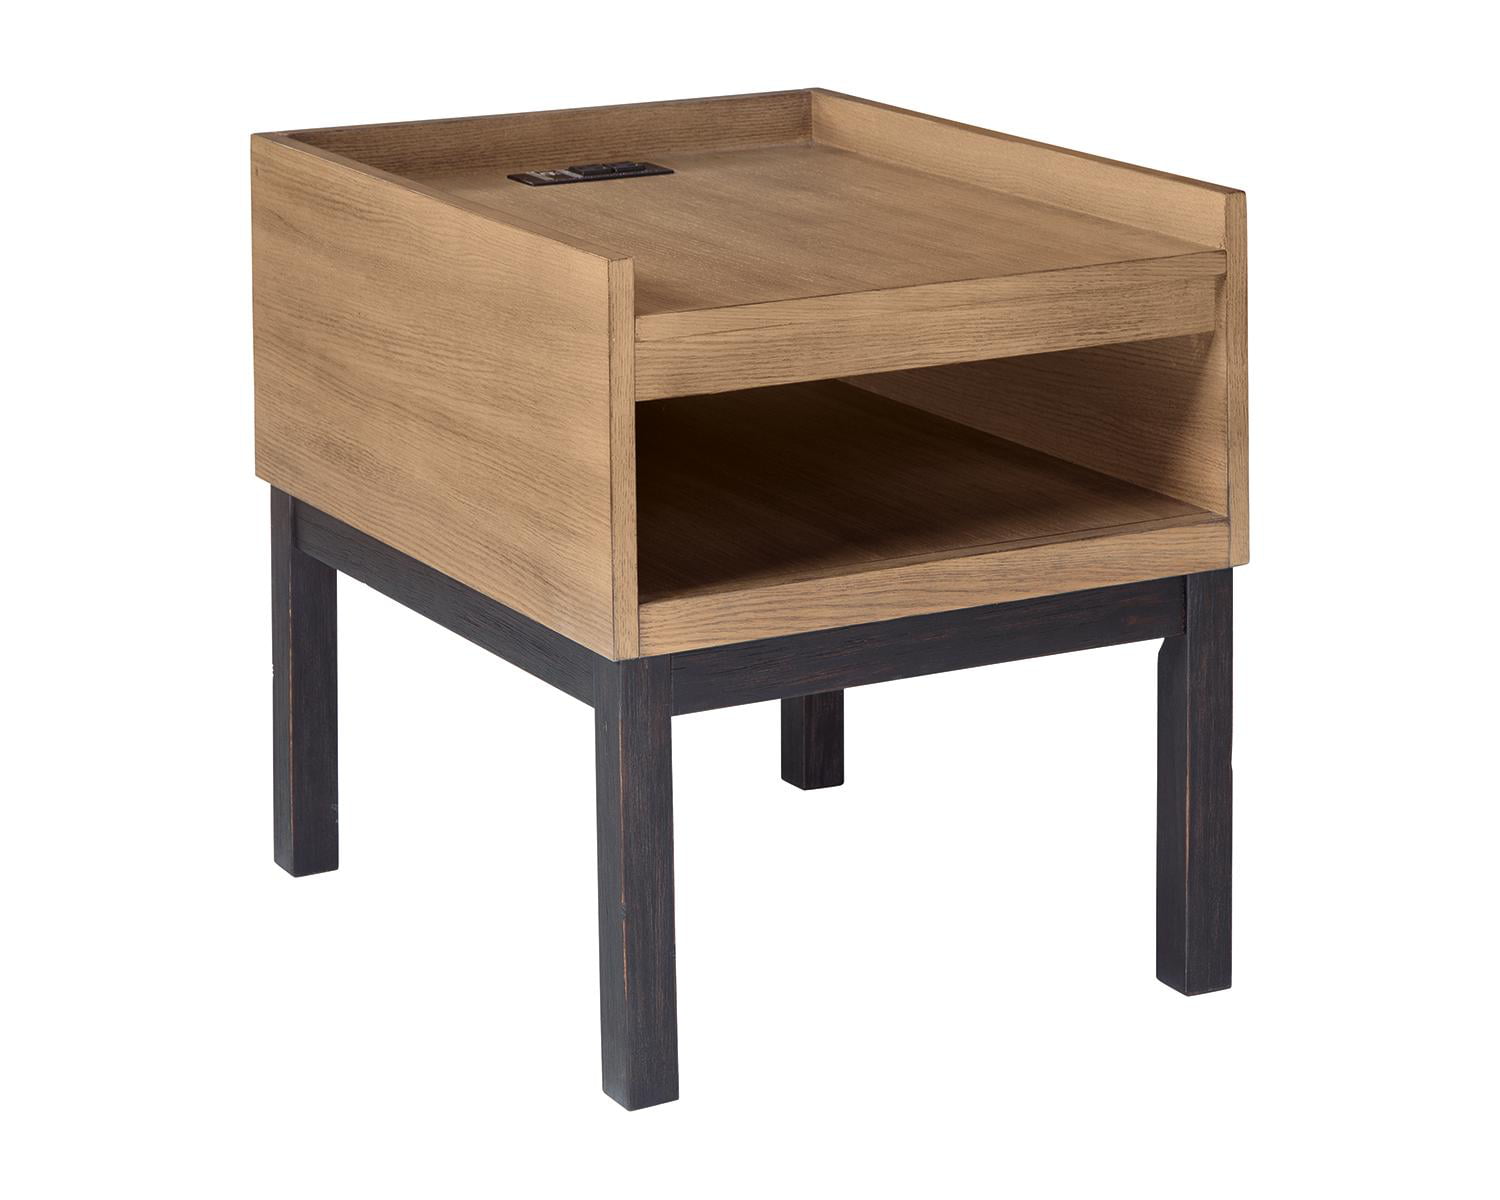 Details about   Brown Fabric Suitcase Side Table With Open Top For Storage 